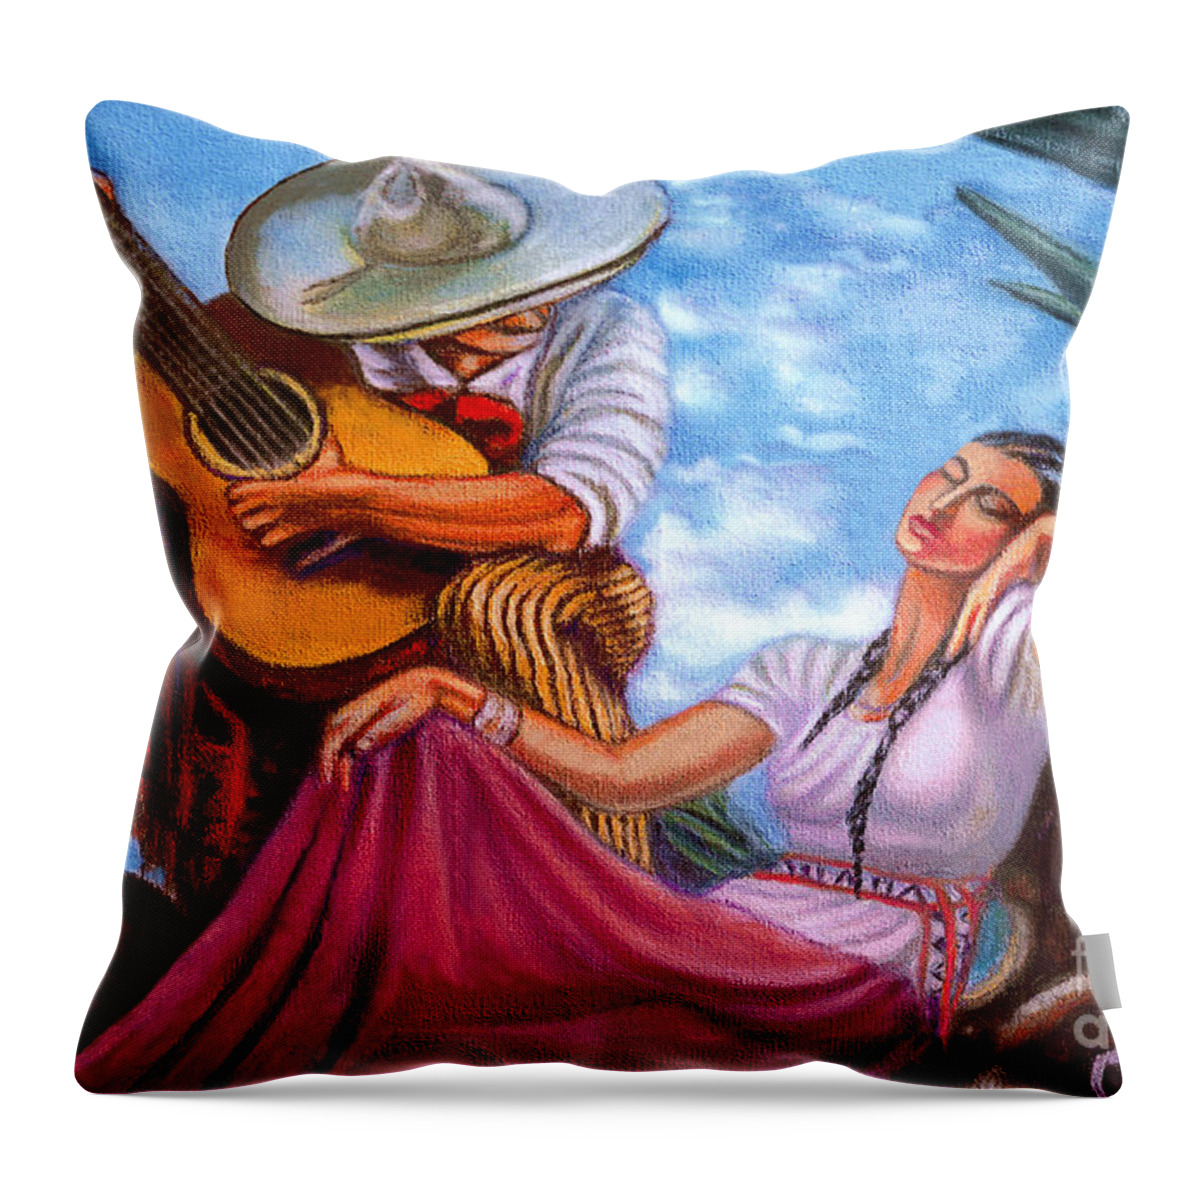 Guitar Player Throw Pillow featuring the painting Guitar Player by William Cain